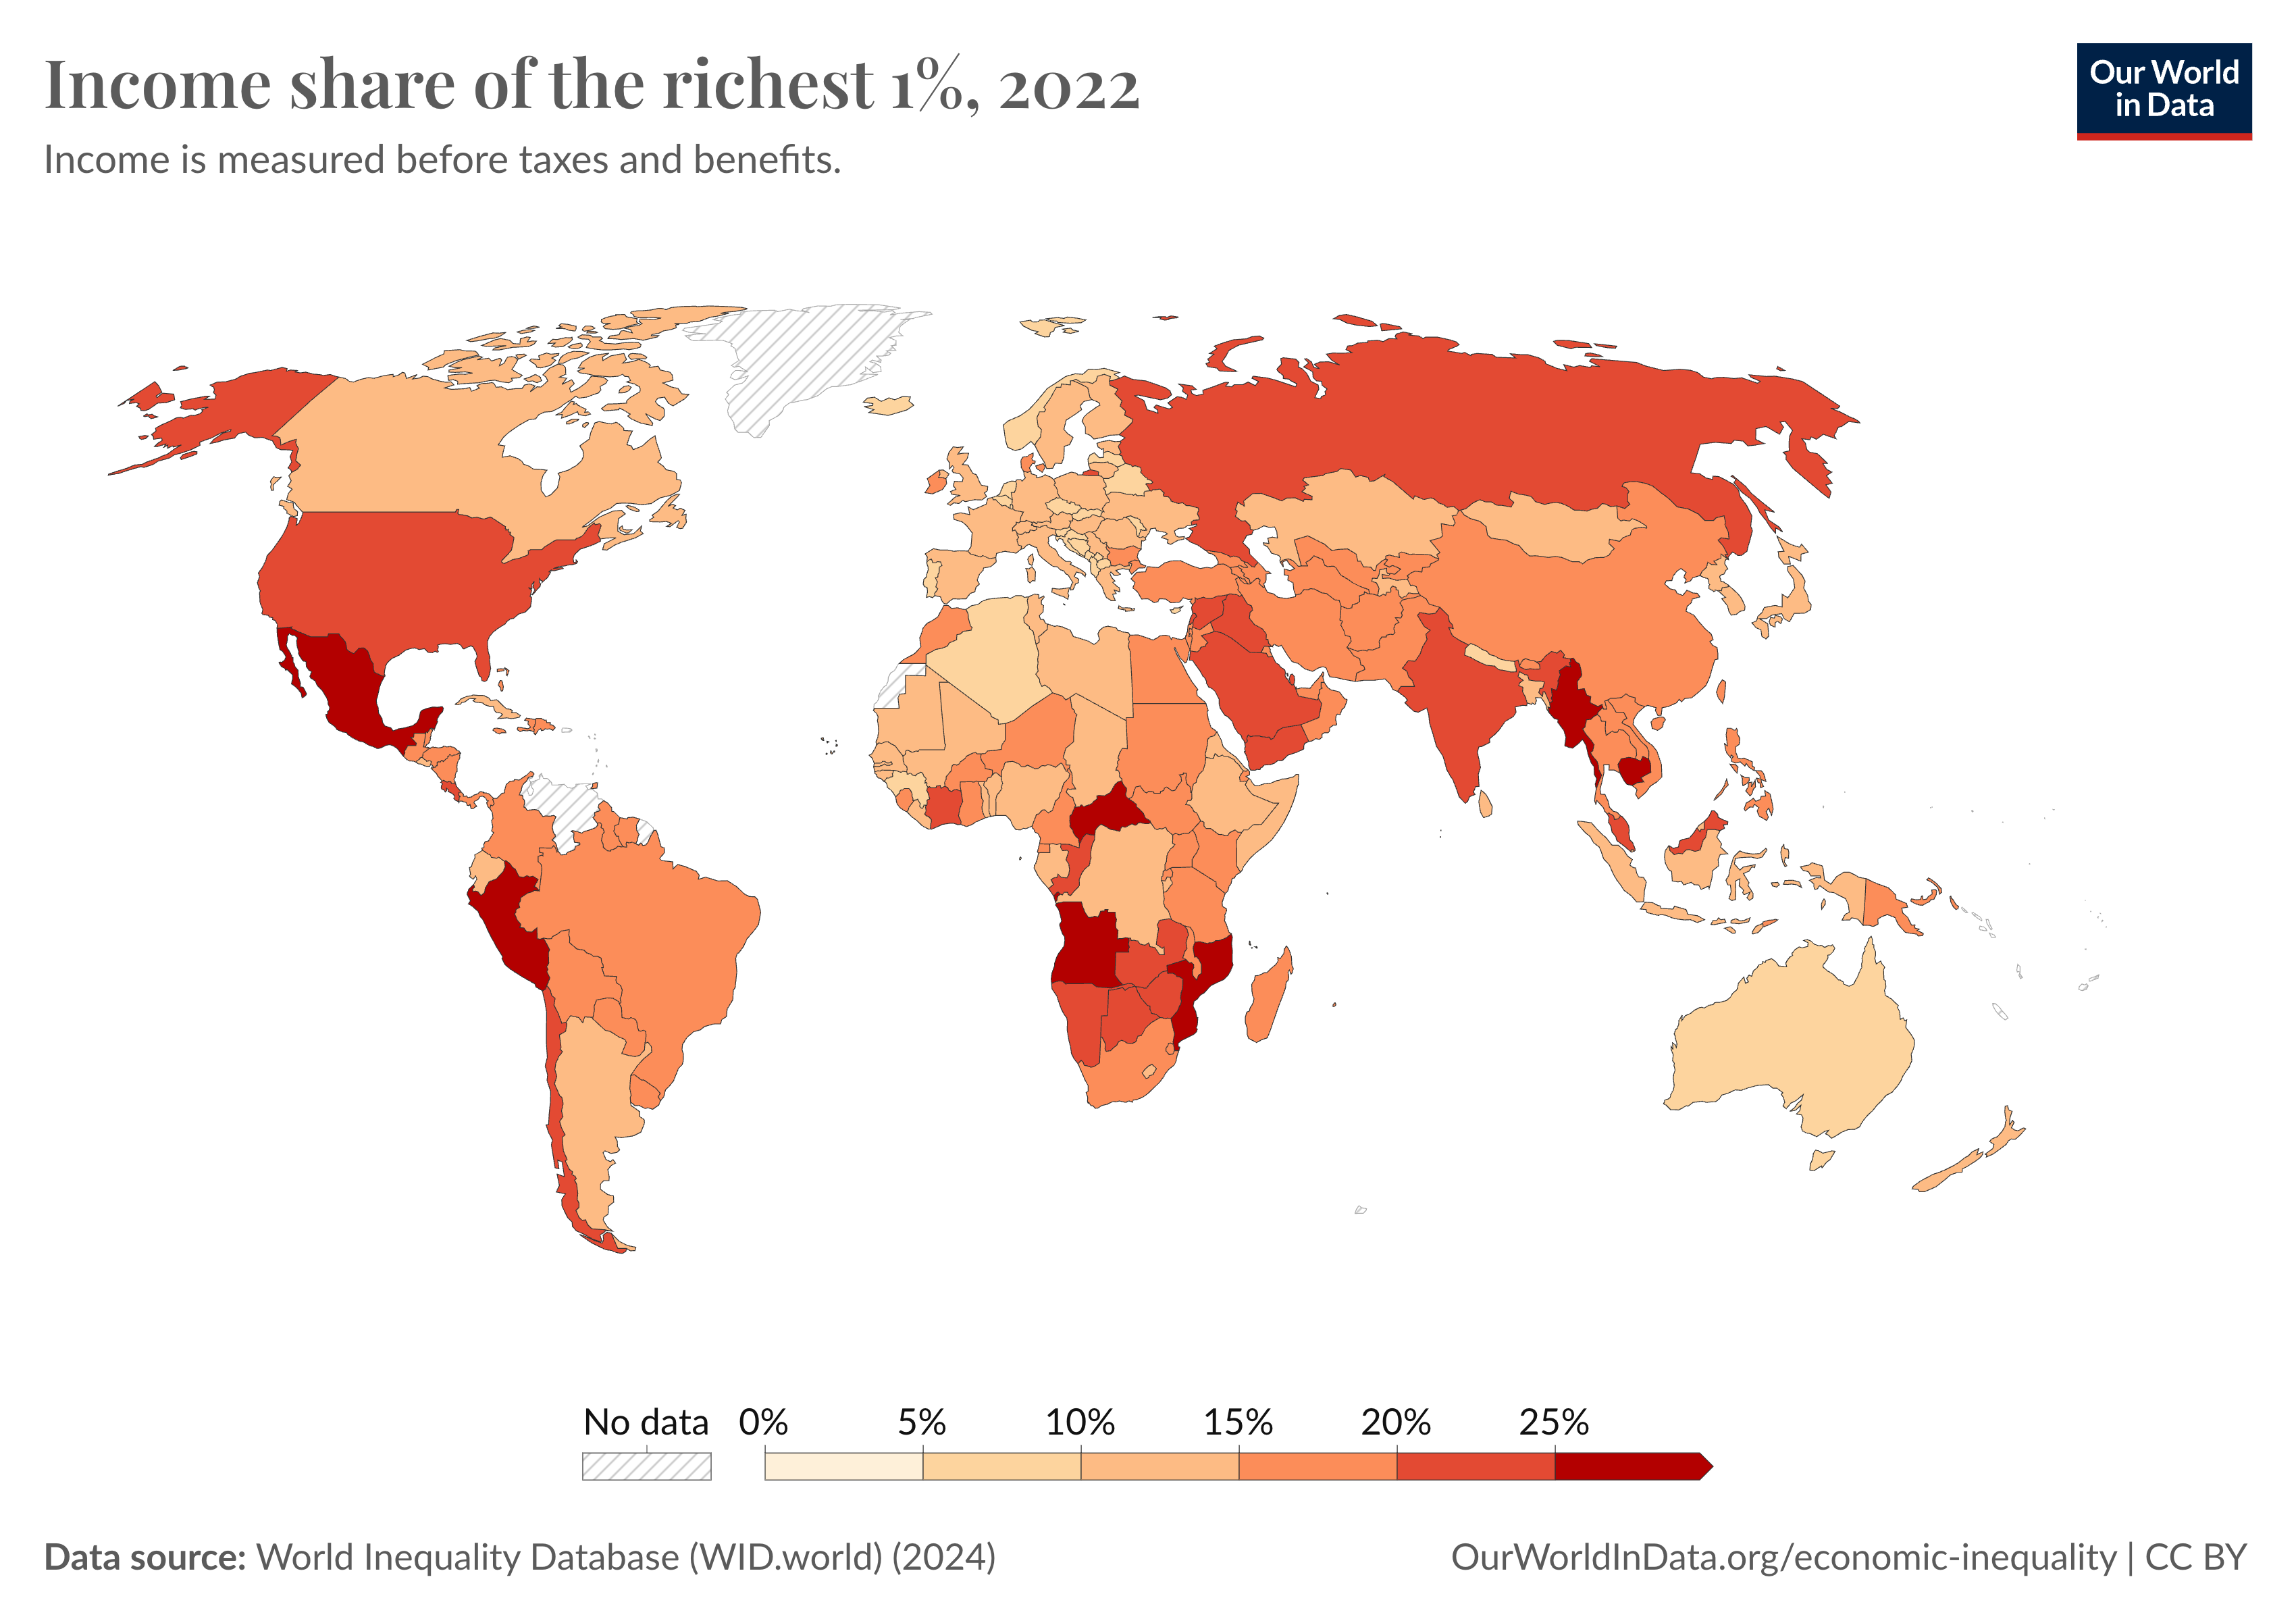 A world map showing the income share of the top 1% before taxes and benefits in 2022. The map is color-coded from light yellow to dark red, representing different levels of income share: light yellow (0-5%), light orange (5-10%), orange (10-15%), dark orange (15-20%), light red (20-25%), and dark red (25%). Countries with no data are marked with hatched lines. Notable regions with high income shares among the top 1% include parts of South America, southern Africa, and some regions in Asia. The data source is the World Inequality Database (WID.world) 2024, and the map is produced by Our World in Data.